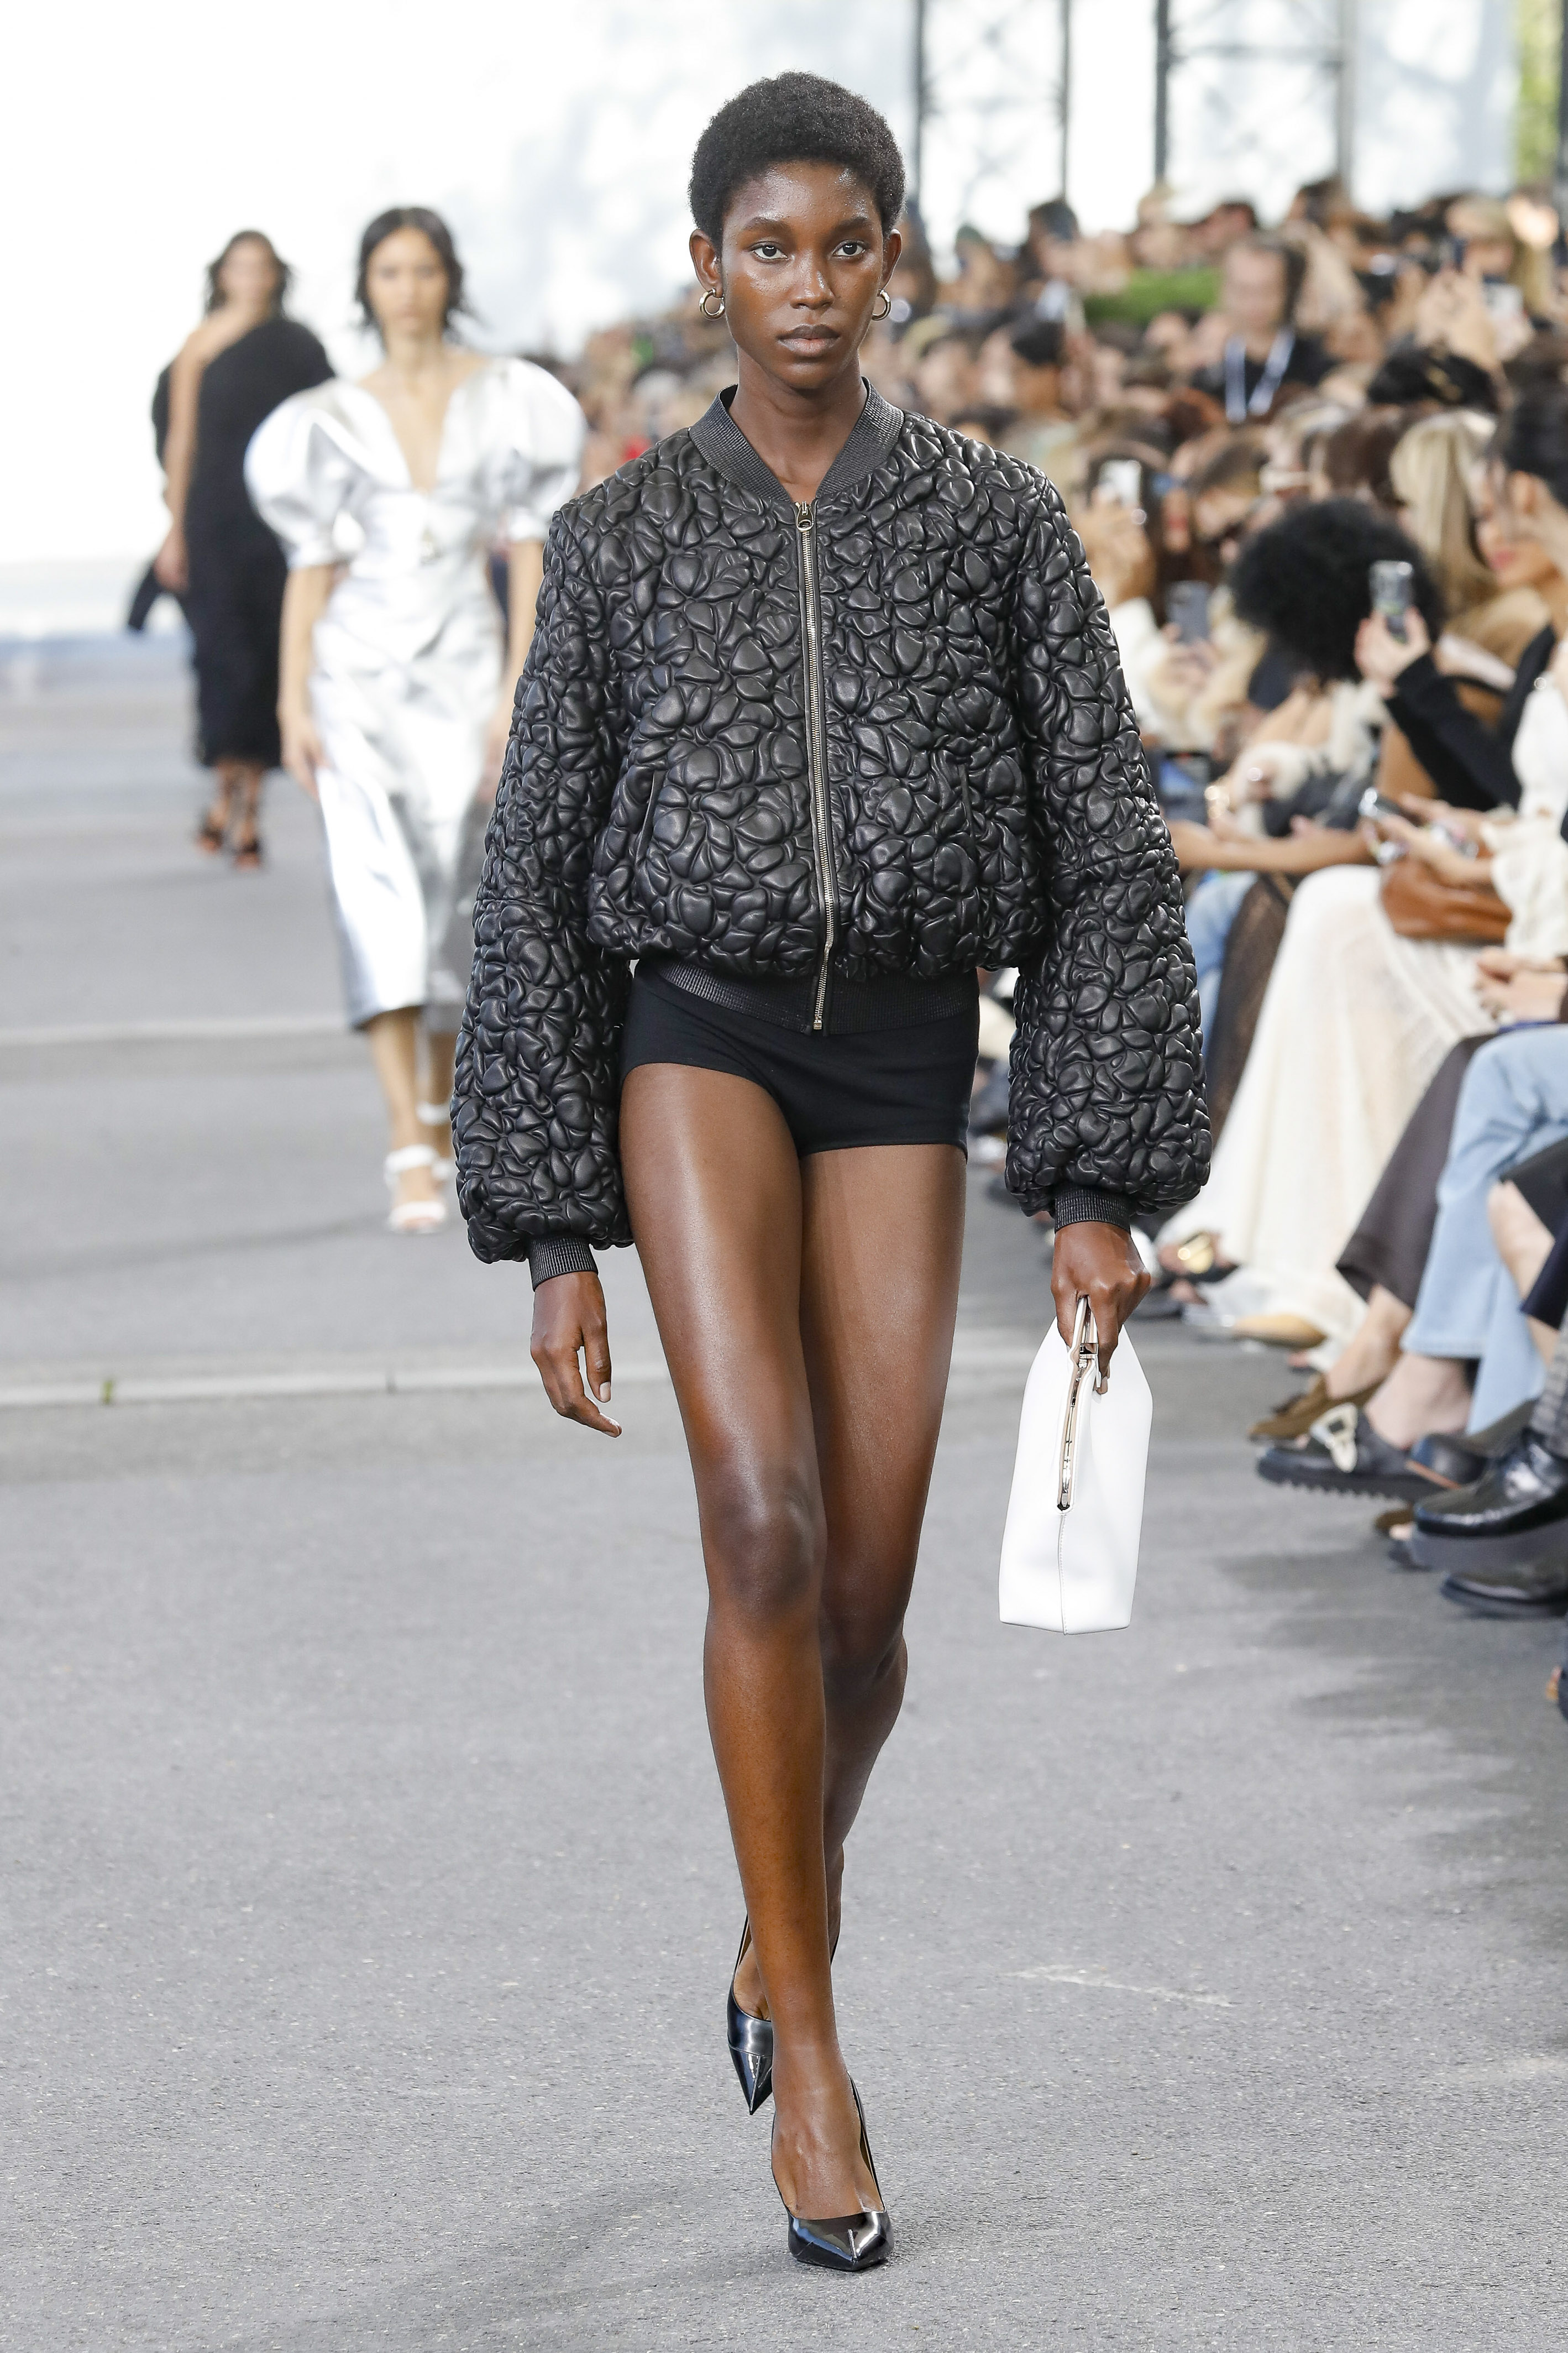 PFW AW21: Gabriela Hearst makes her debut for Chloé